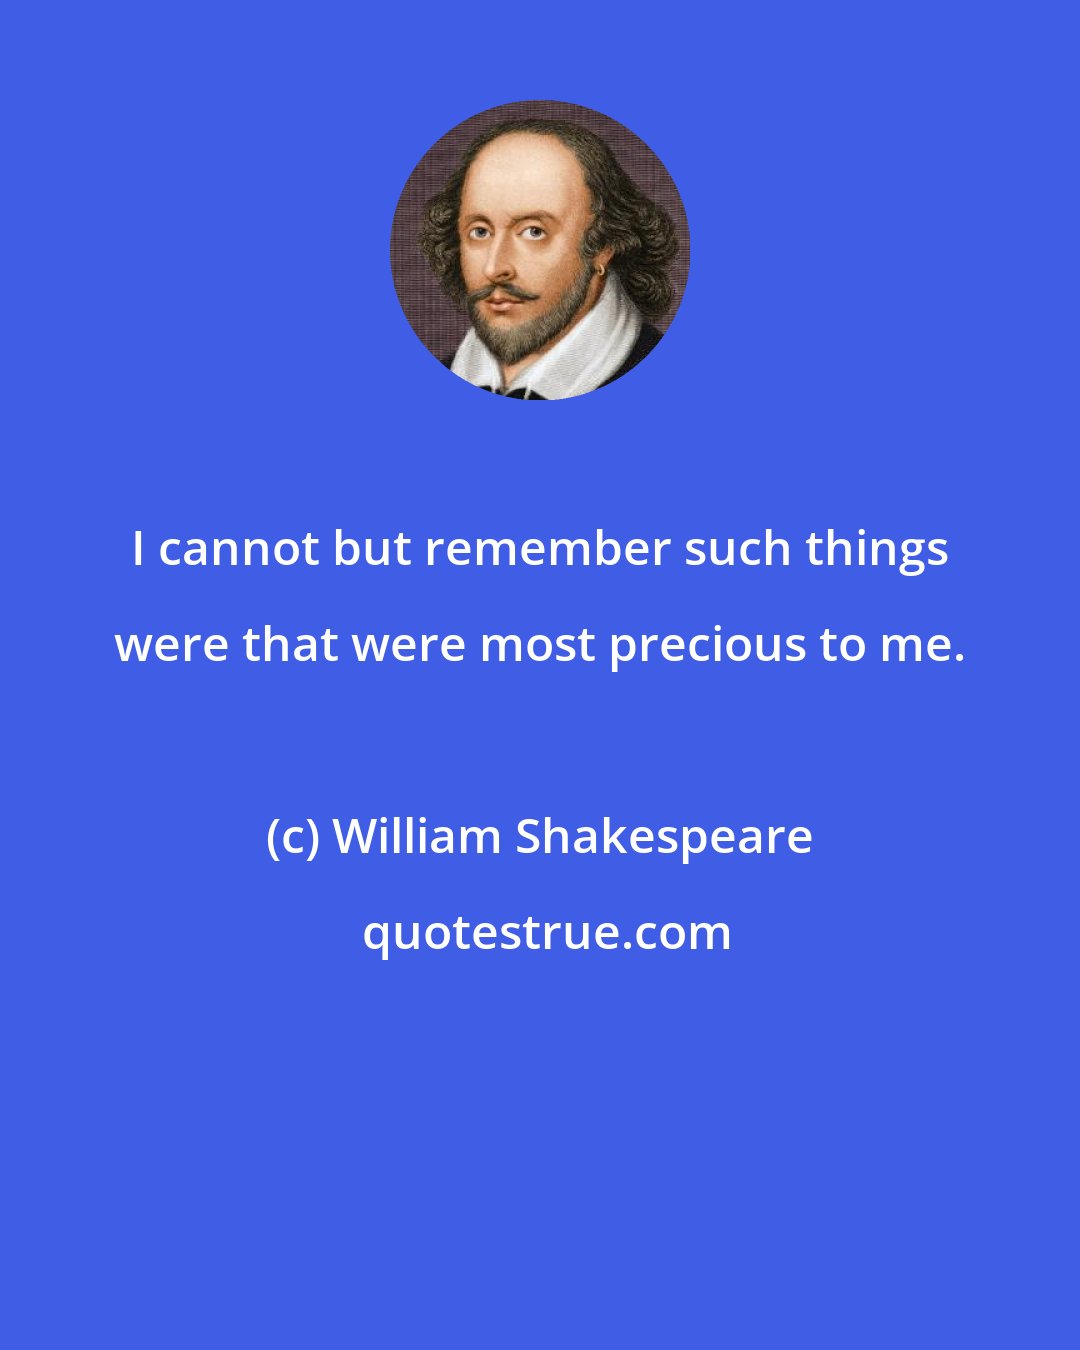 William Shakespeare: I cannot but remember such things were that were most precious to me.